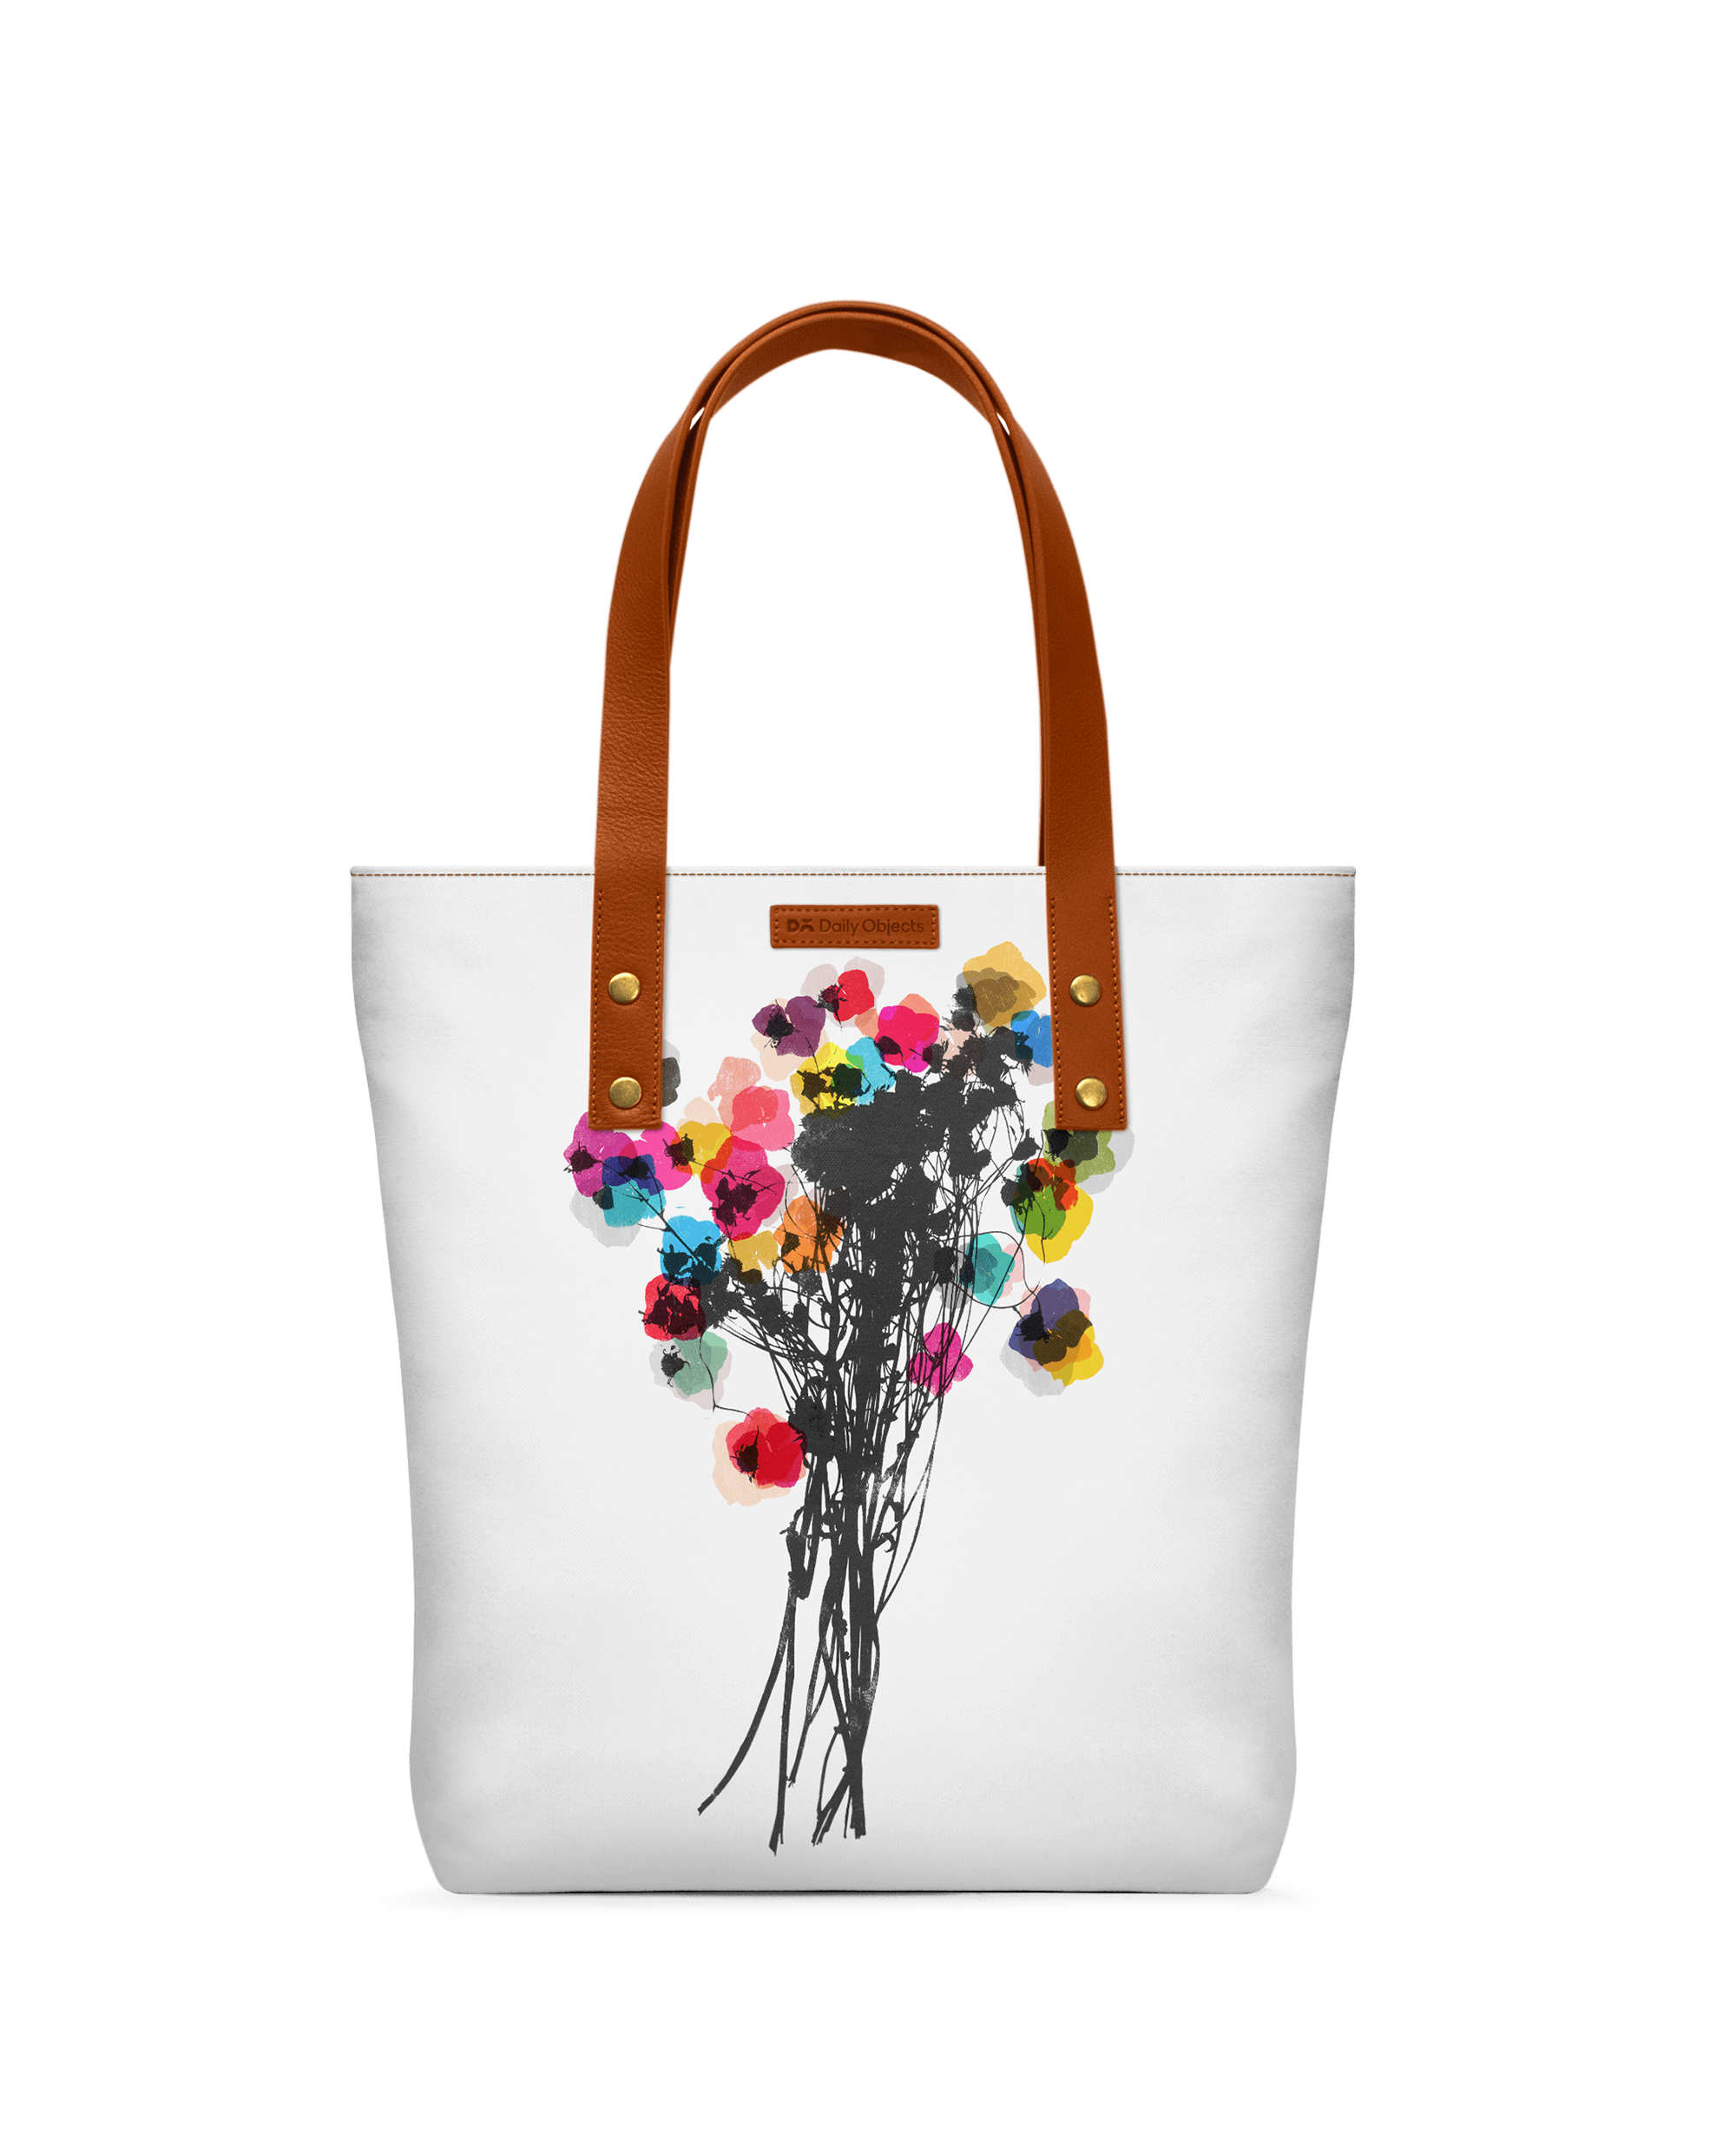 Buy Designer Collections of Bags and Sleeves Online in India - DailyObjects